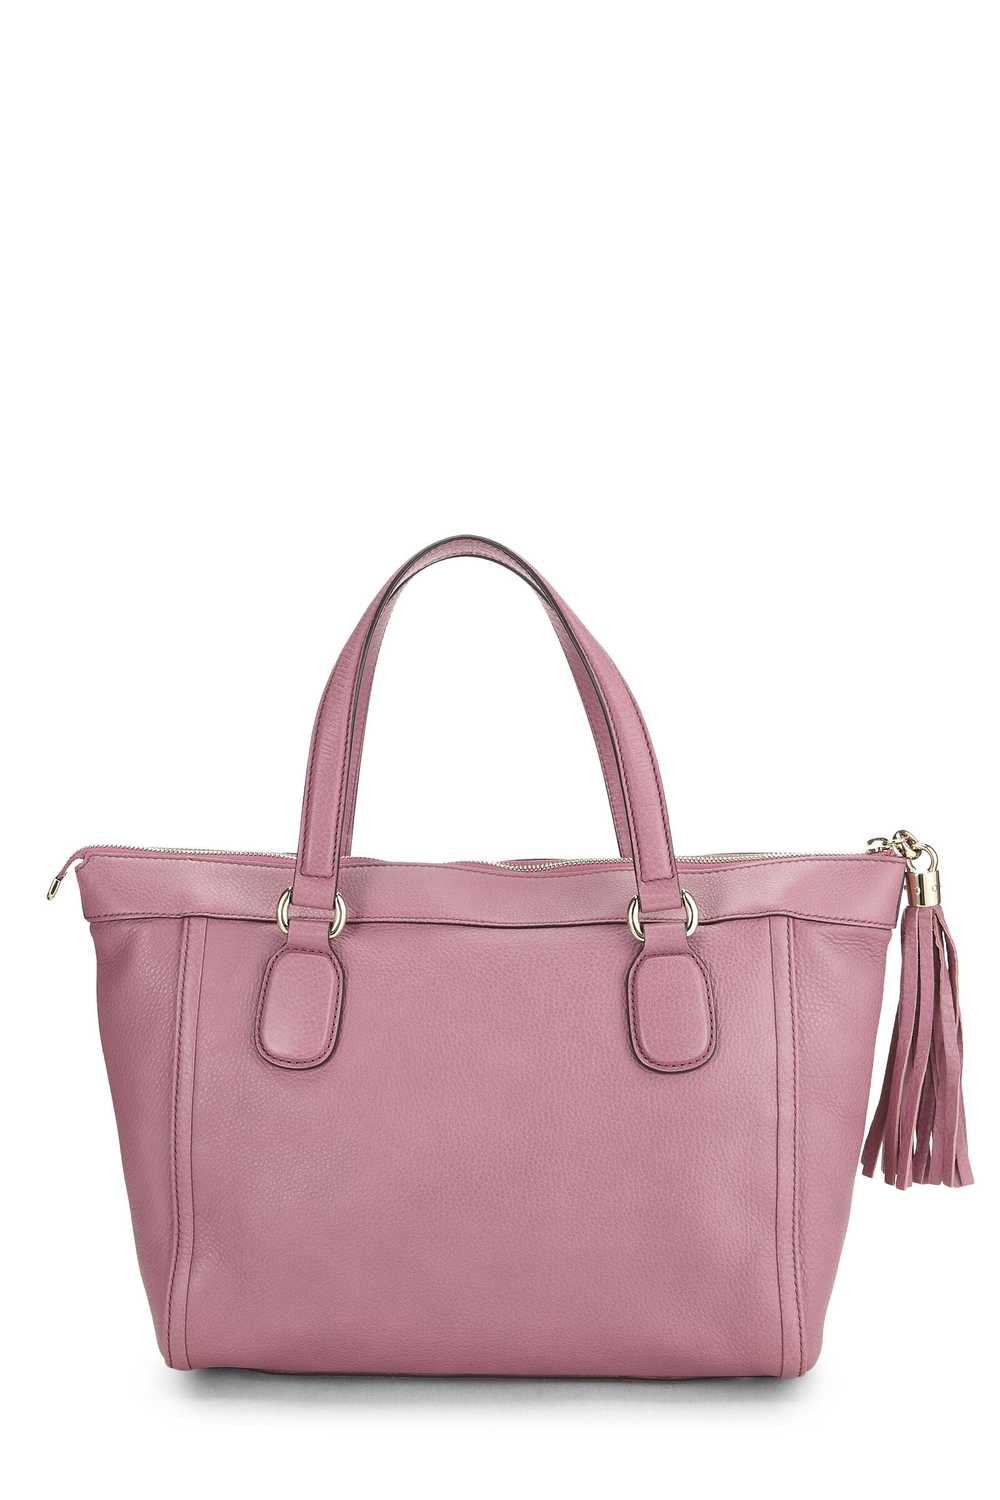 Pink Grained Leather Soho Zip Tote - image 4